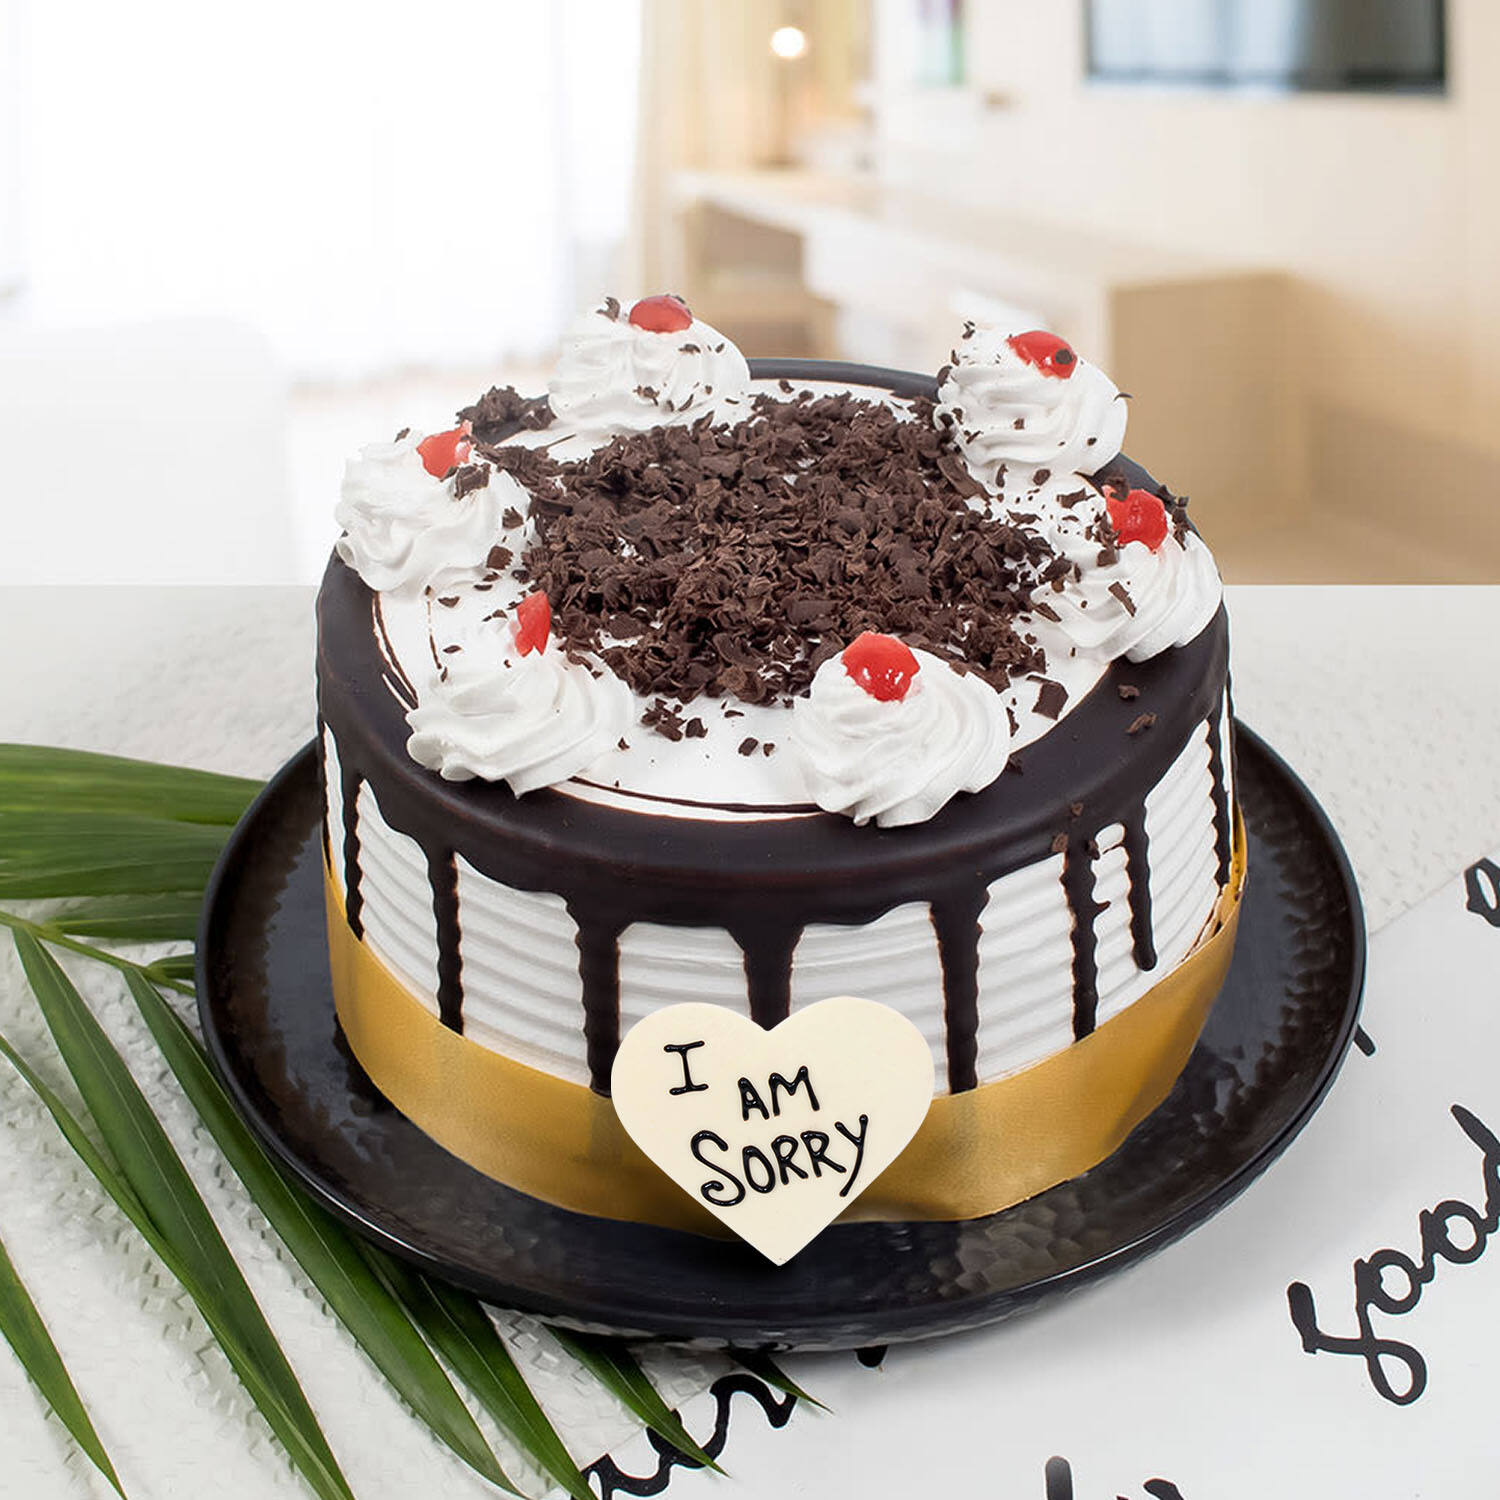 80 Rose Garden Sorry Gifts | Apology Blackforest Cake with Sorry Message  500g For Your Loved Ones | Effortlessly Convey Regret Nextday Delivery -